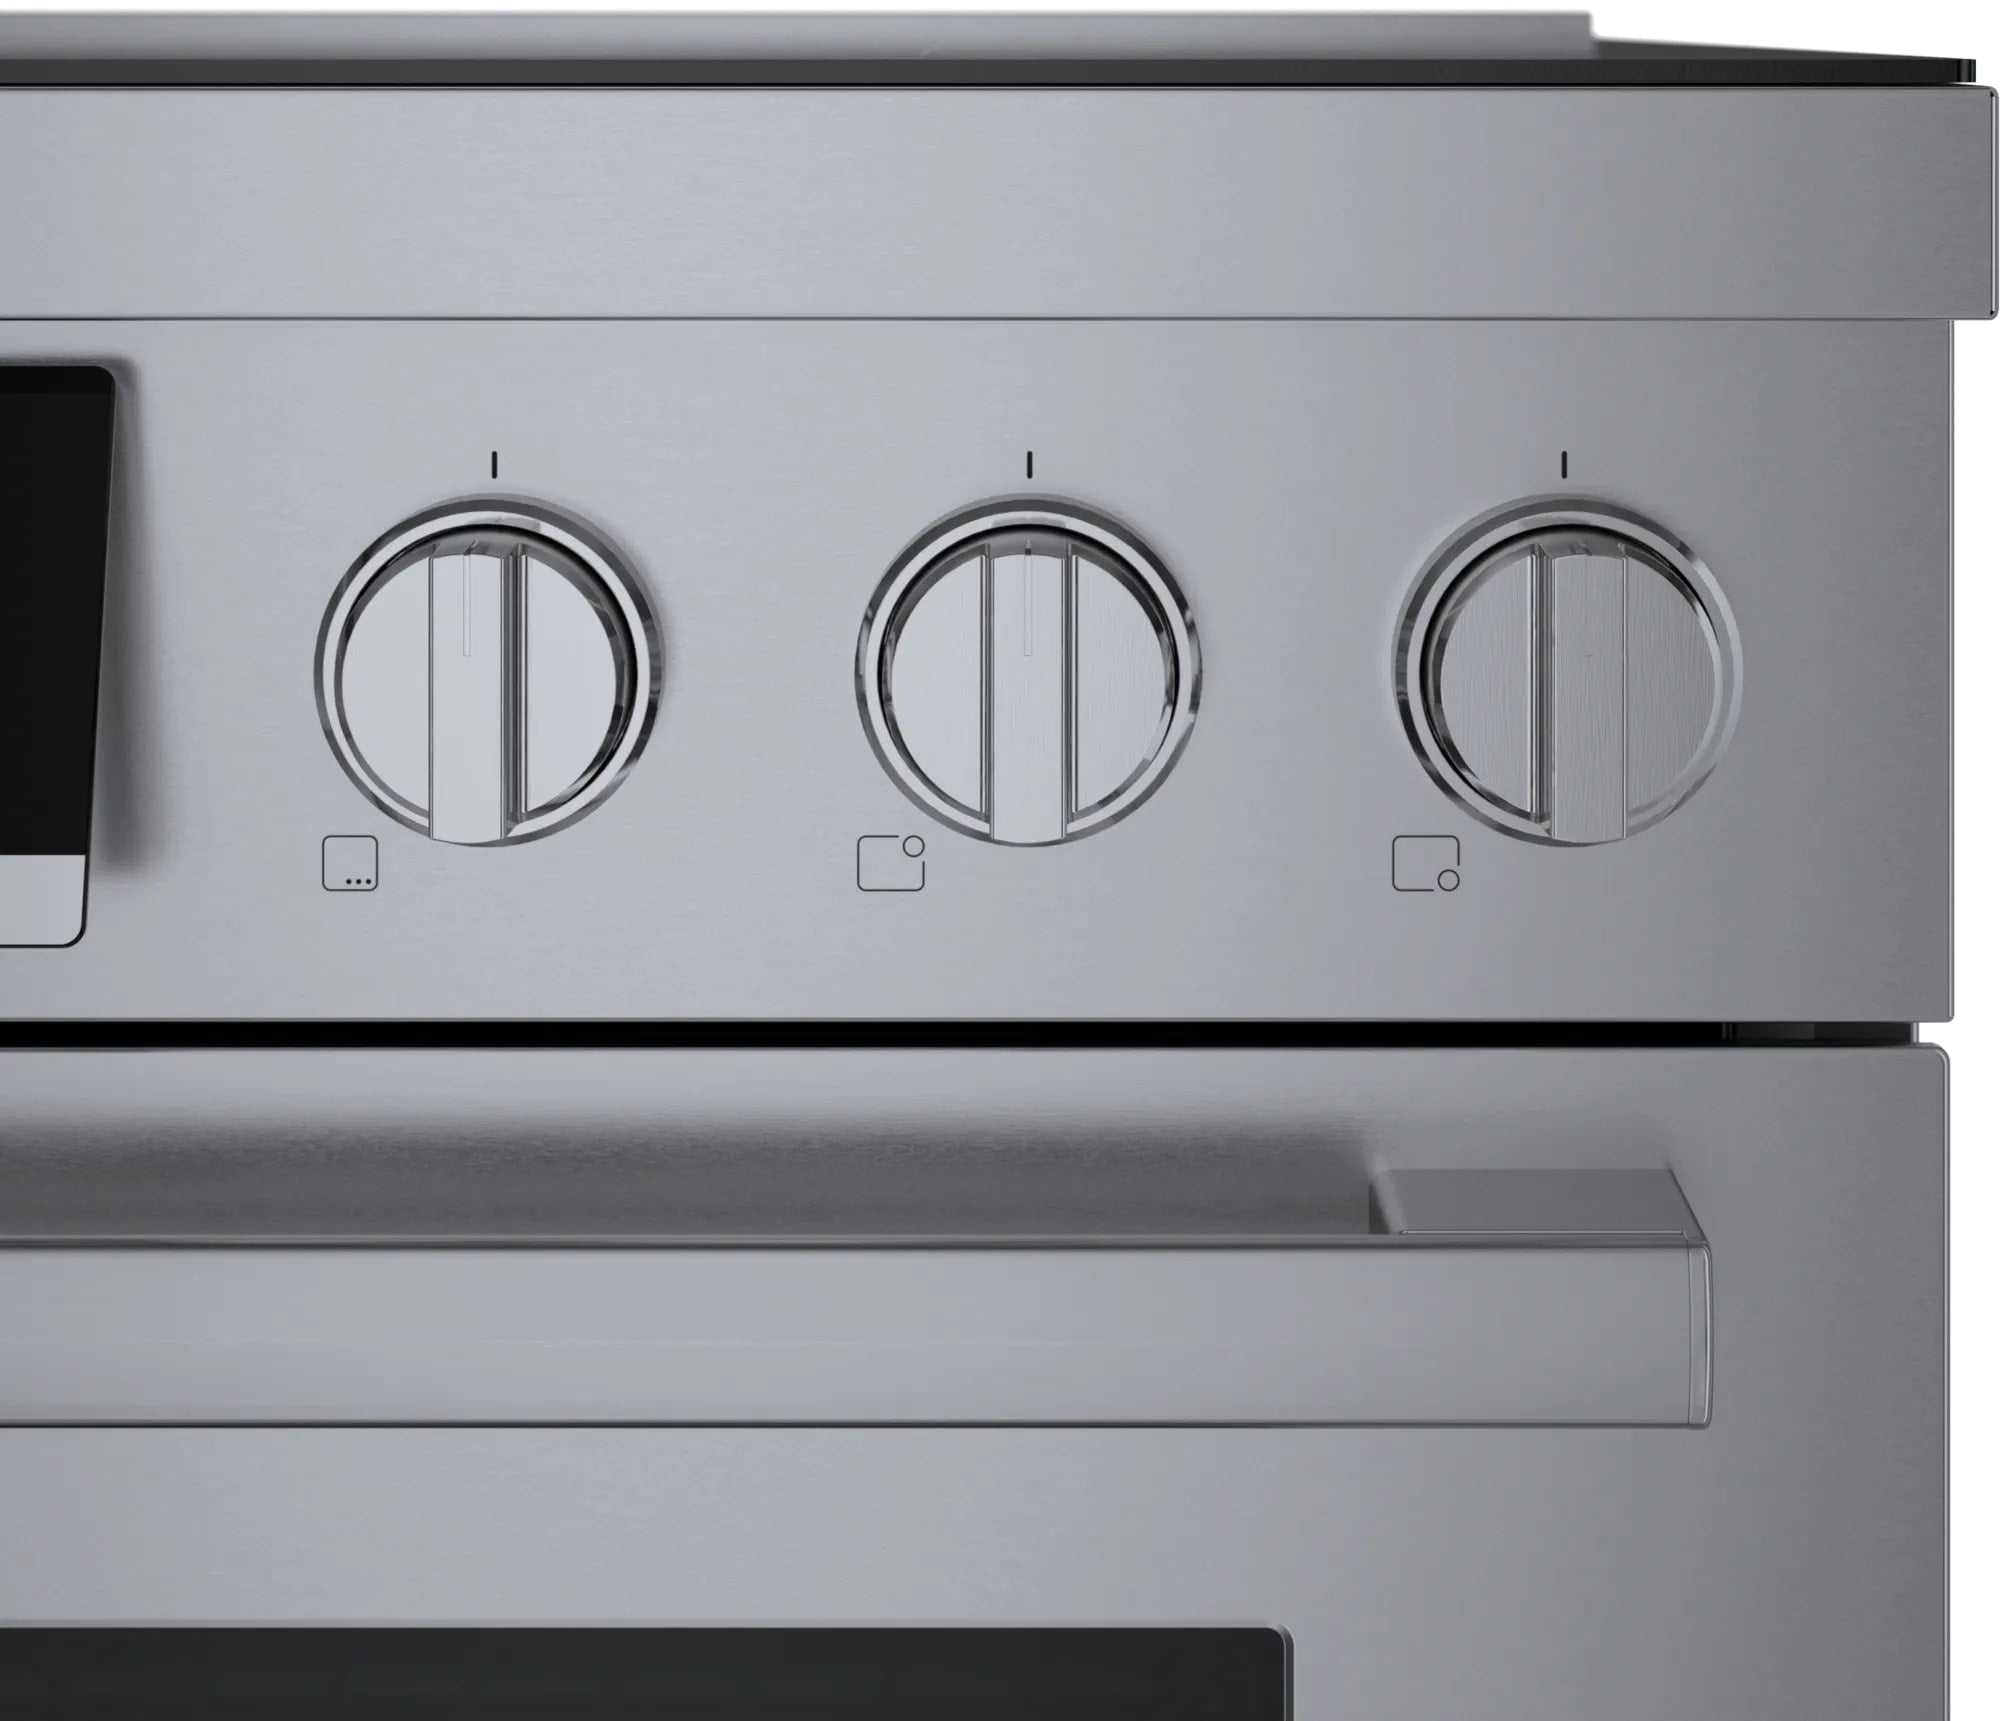 Bosch - 3.7 cu. ft  Induction Range in Stainless - HIS8655C